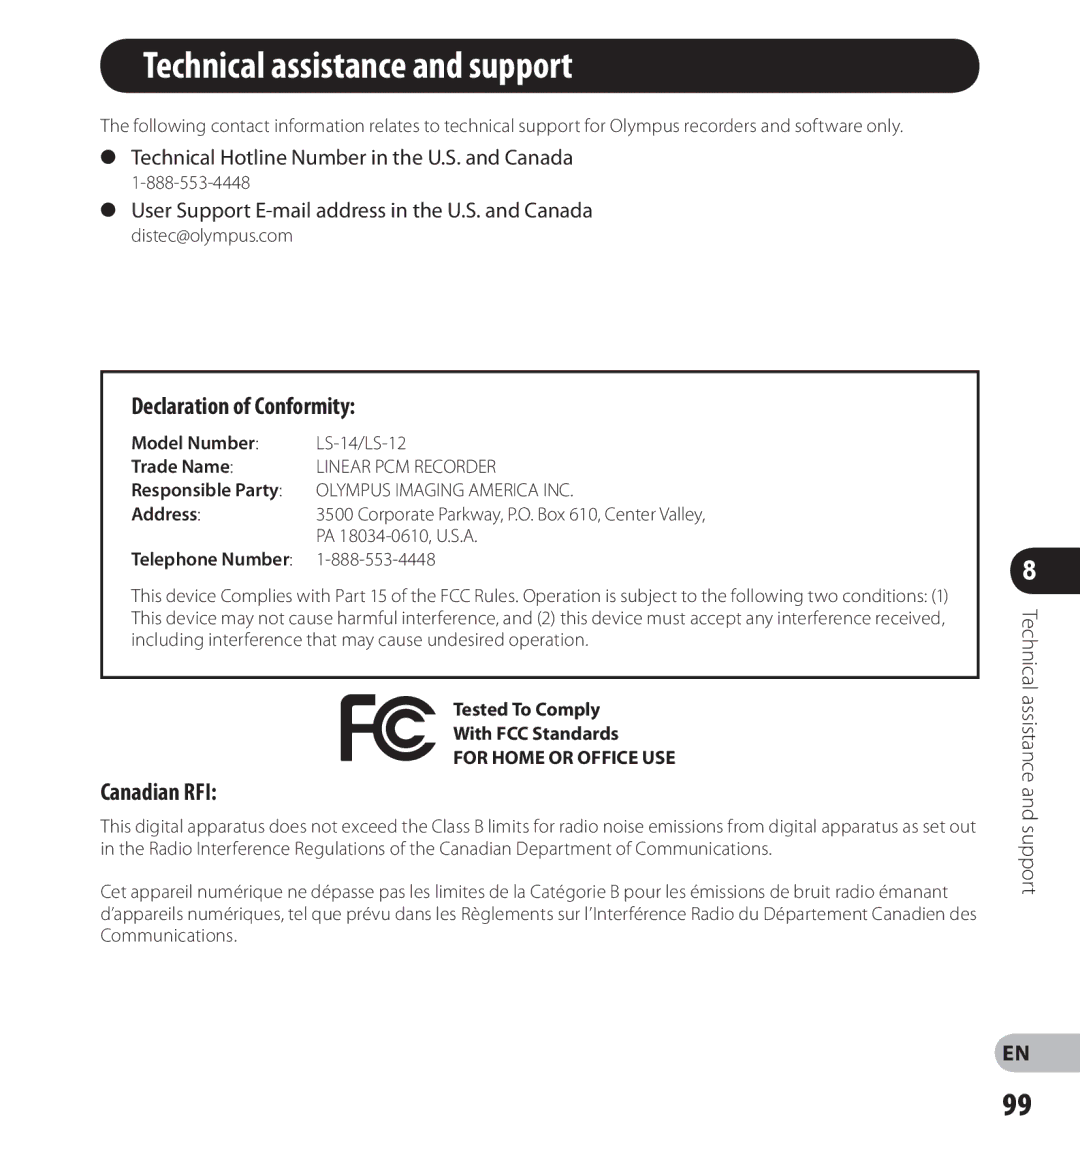 Olympus LS-12, LS-14 manual Technical assistance and support, Declaration of Conformity, Canadian RFI 